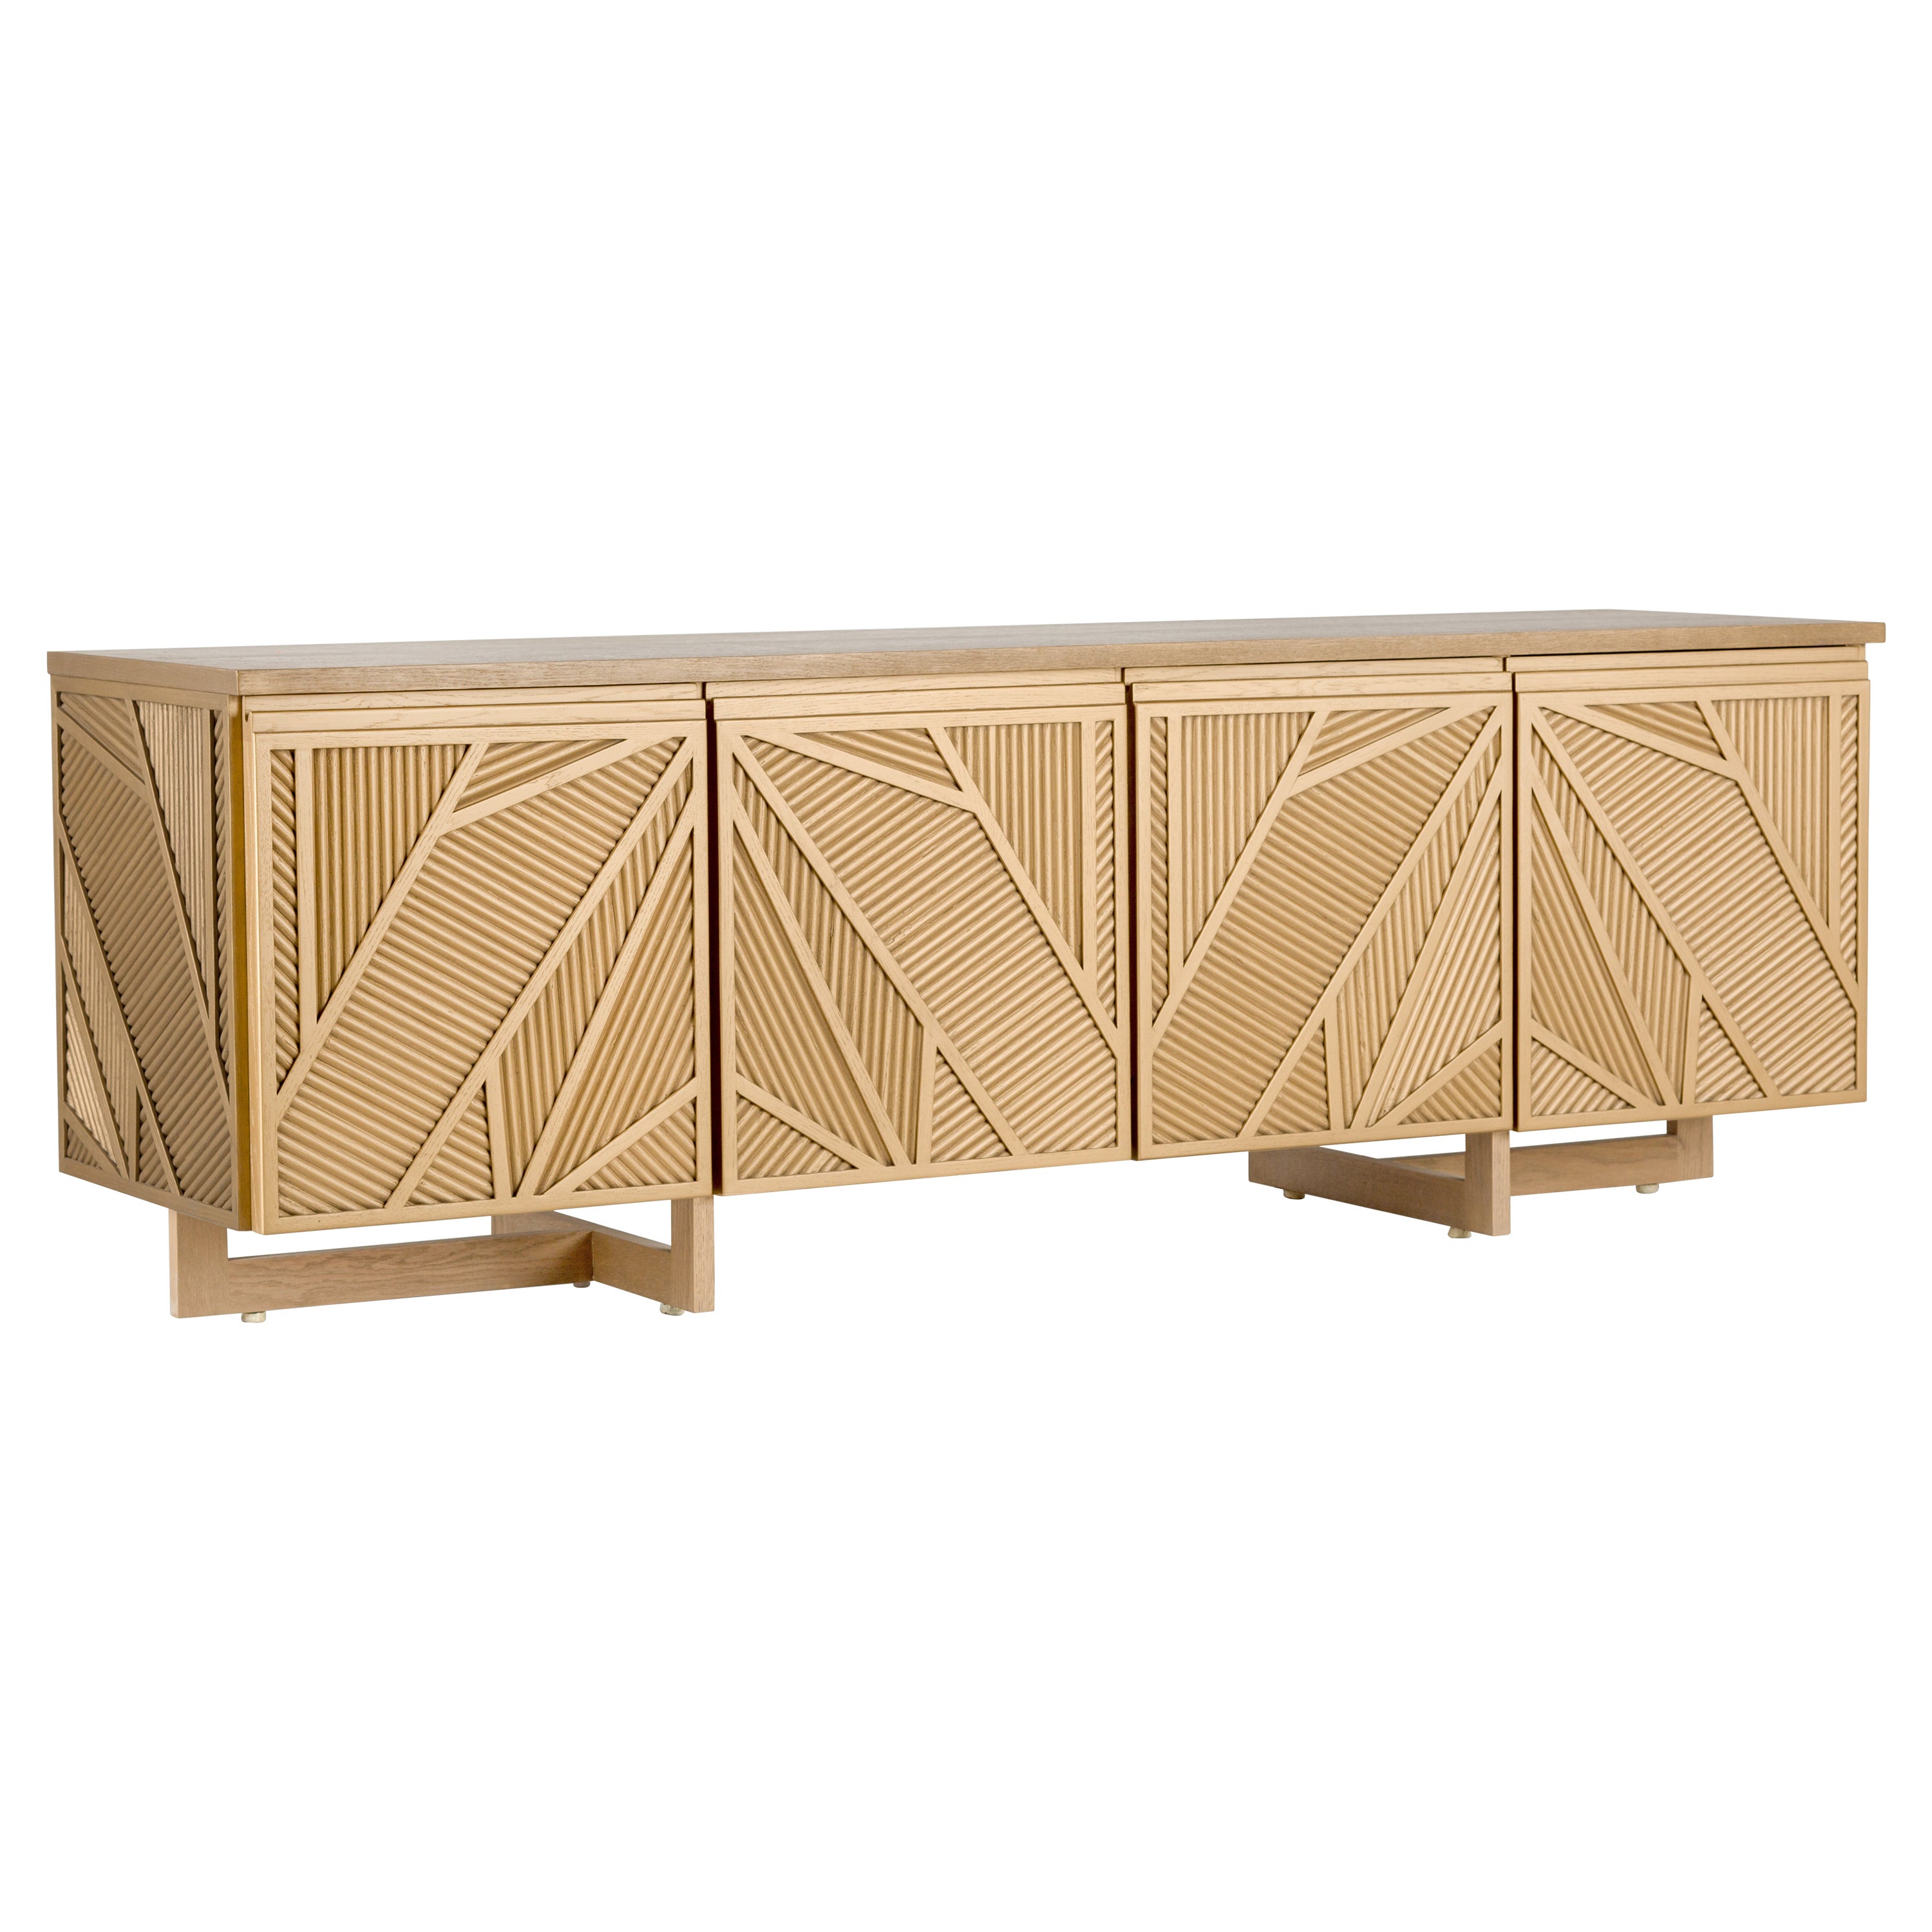 Geometric Oak Sticks TV Unit Inspired from Ancient Egypt Use of Palm Branches